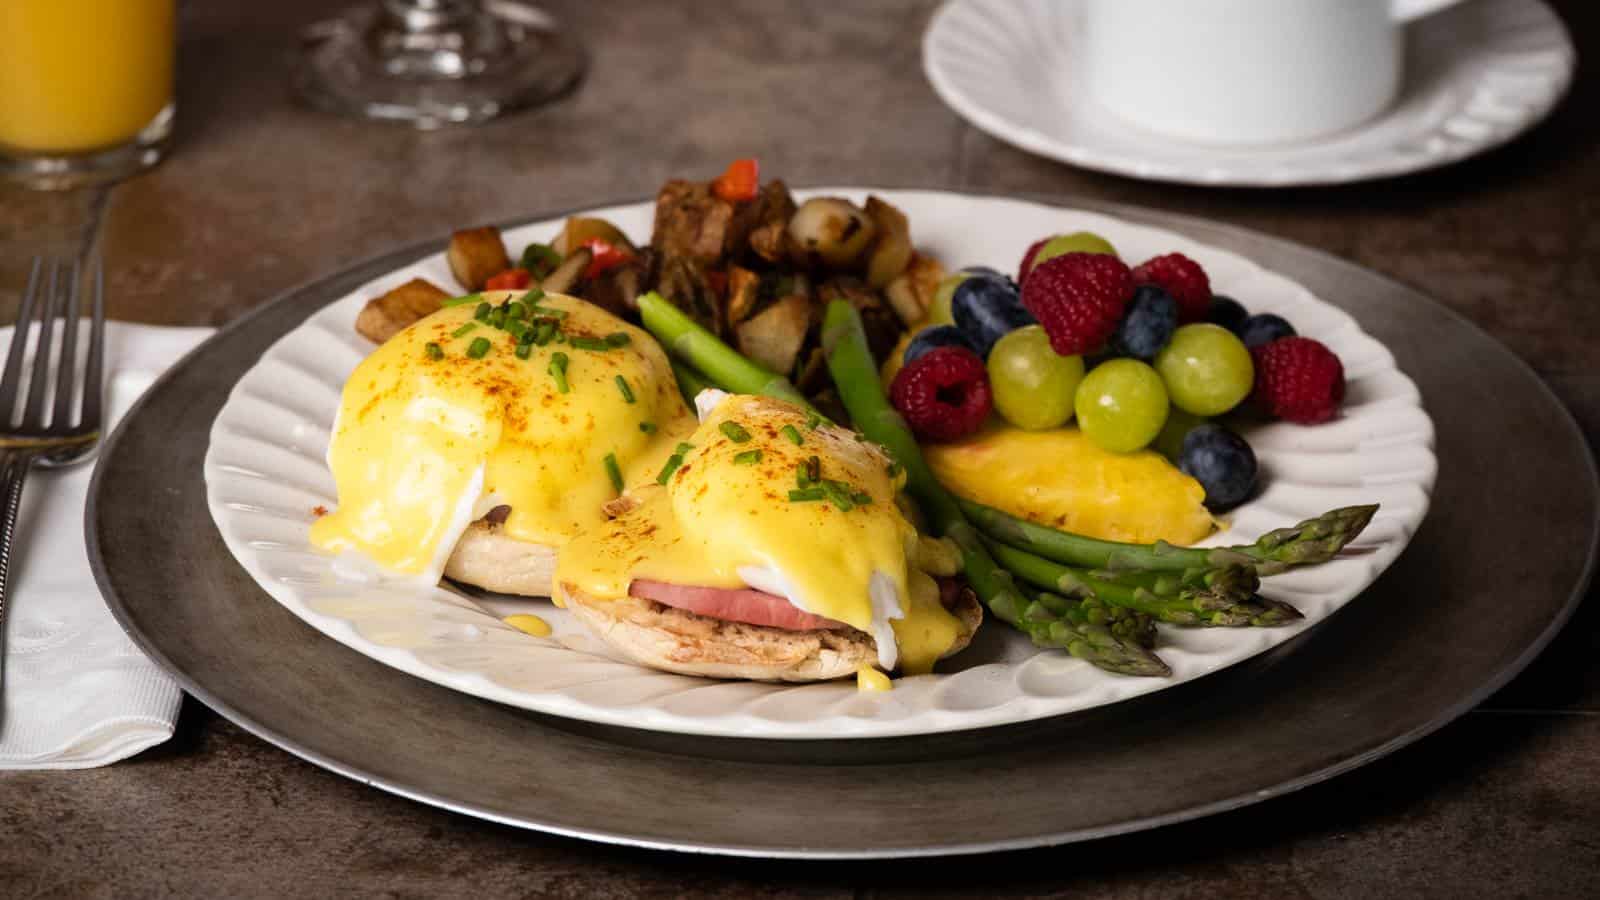 Close up view of white plate with eggs benedict, home fries, asparagus, and fruit